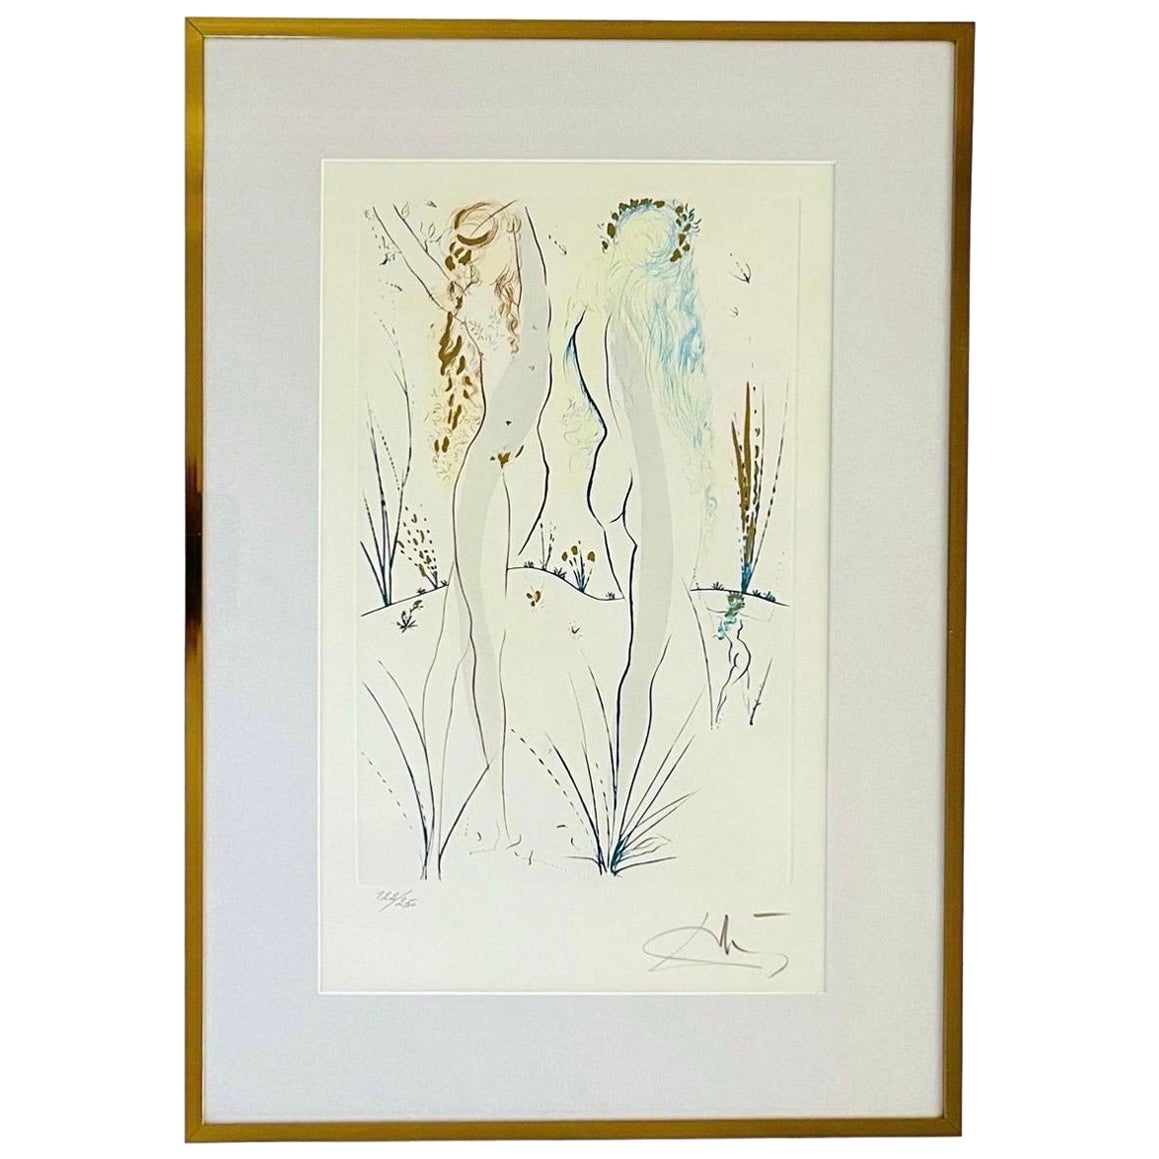 Salvador Dali Signed Lithograph Two Nudes From Song of Songs of Solomon 122/250 For Sale